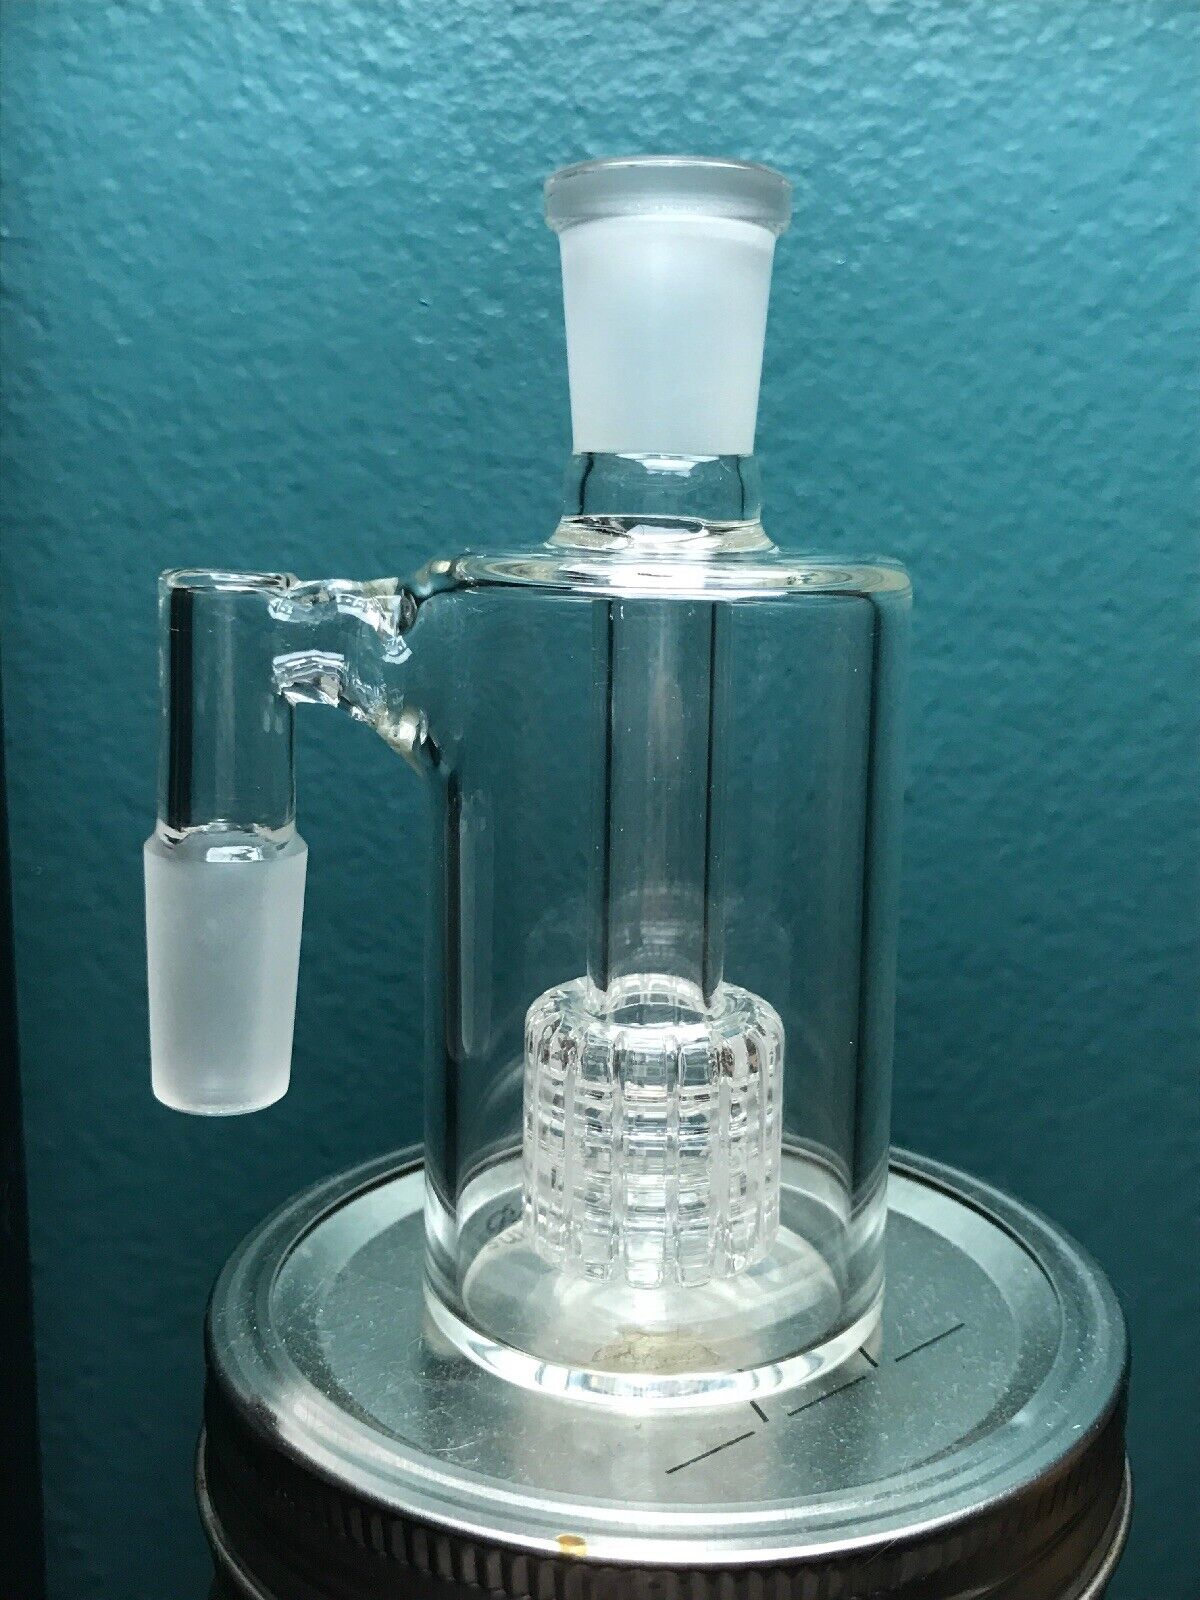 4/20 SPECIAL!! 14mm Ash Catcher 90 degree Tire Perc - Clear - Free Shipping. Available Now for 10.95